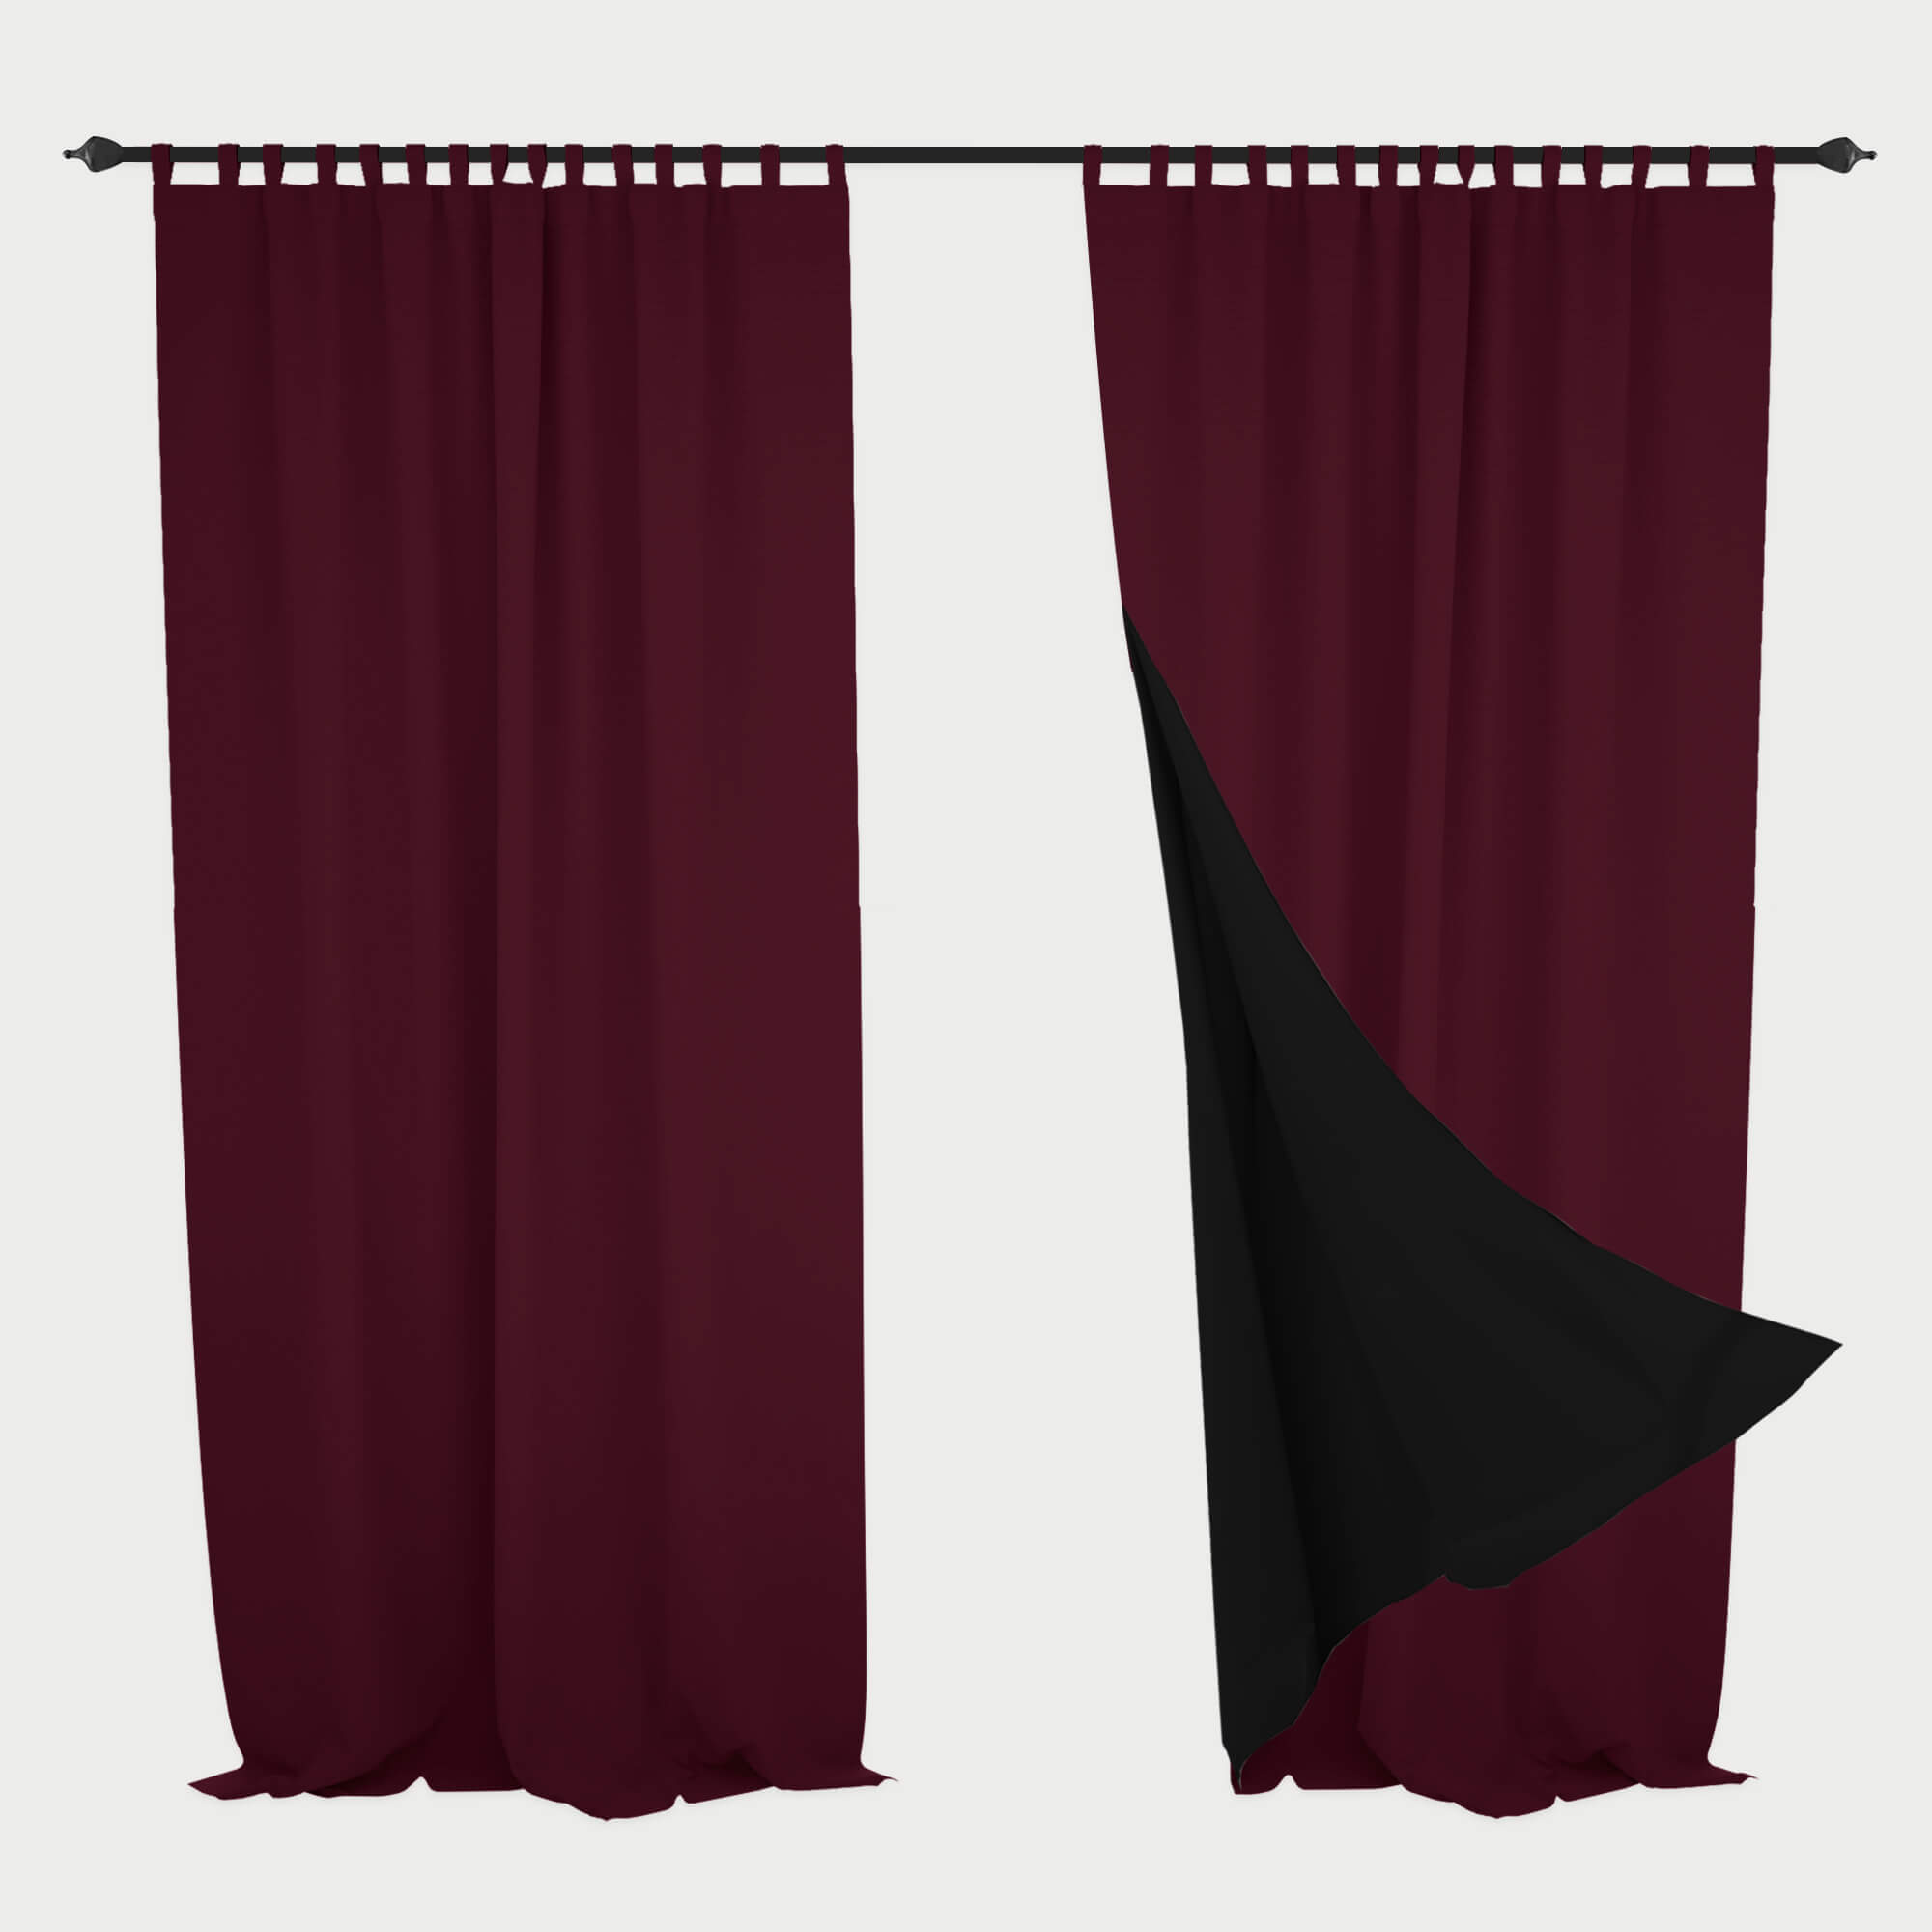 SNOWCITY Blackout Curtains Wine Red - Tab Top